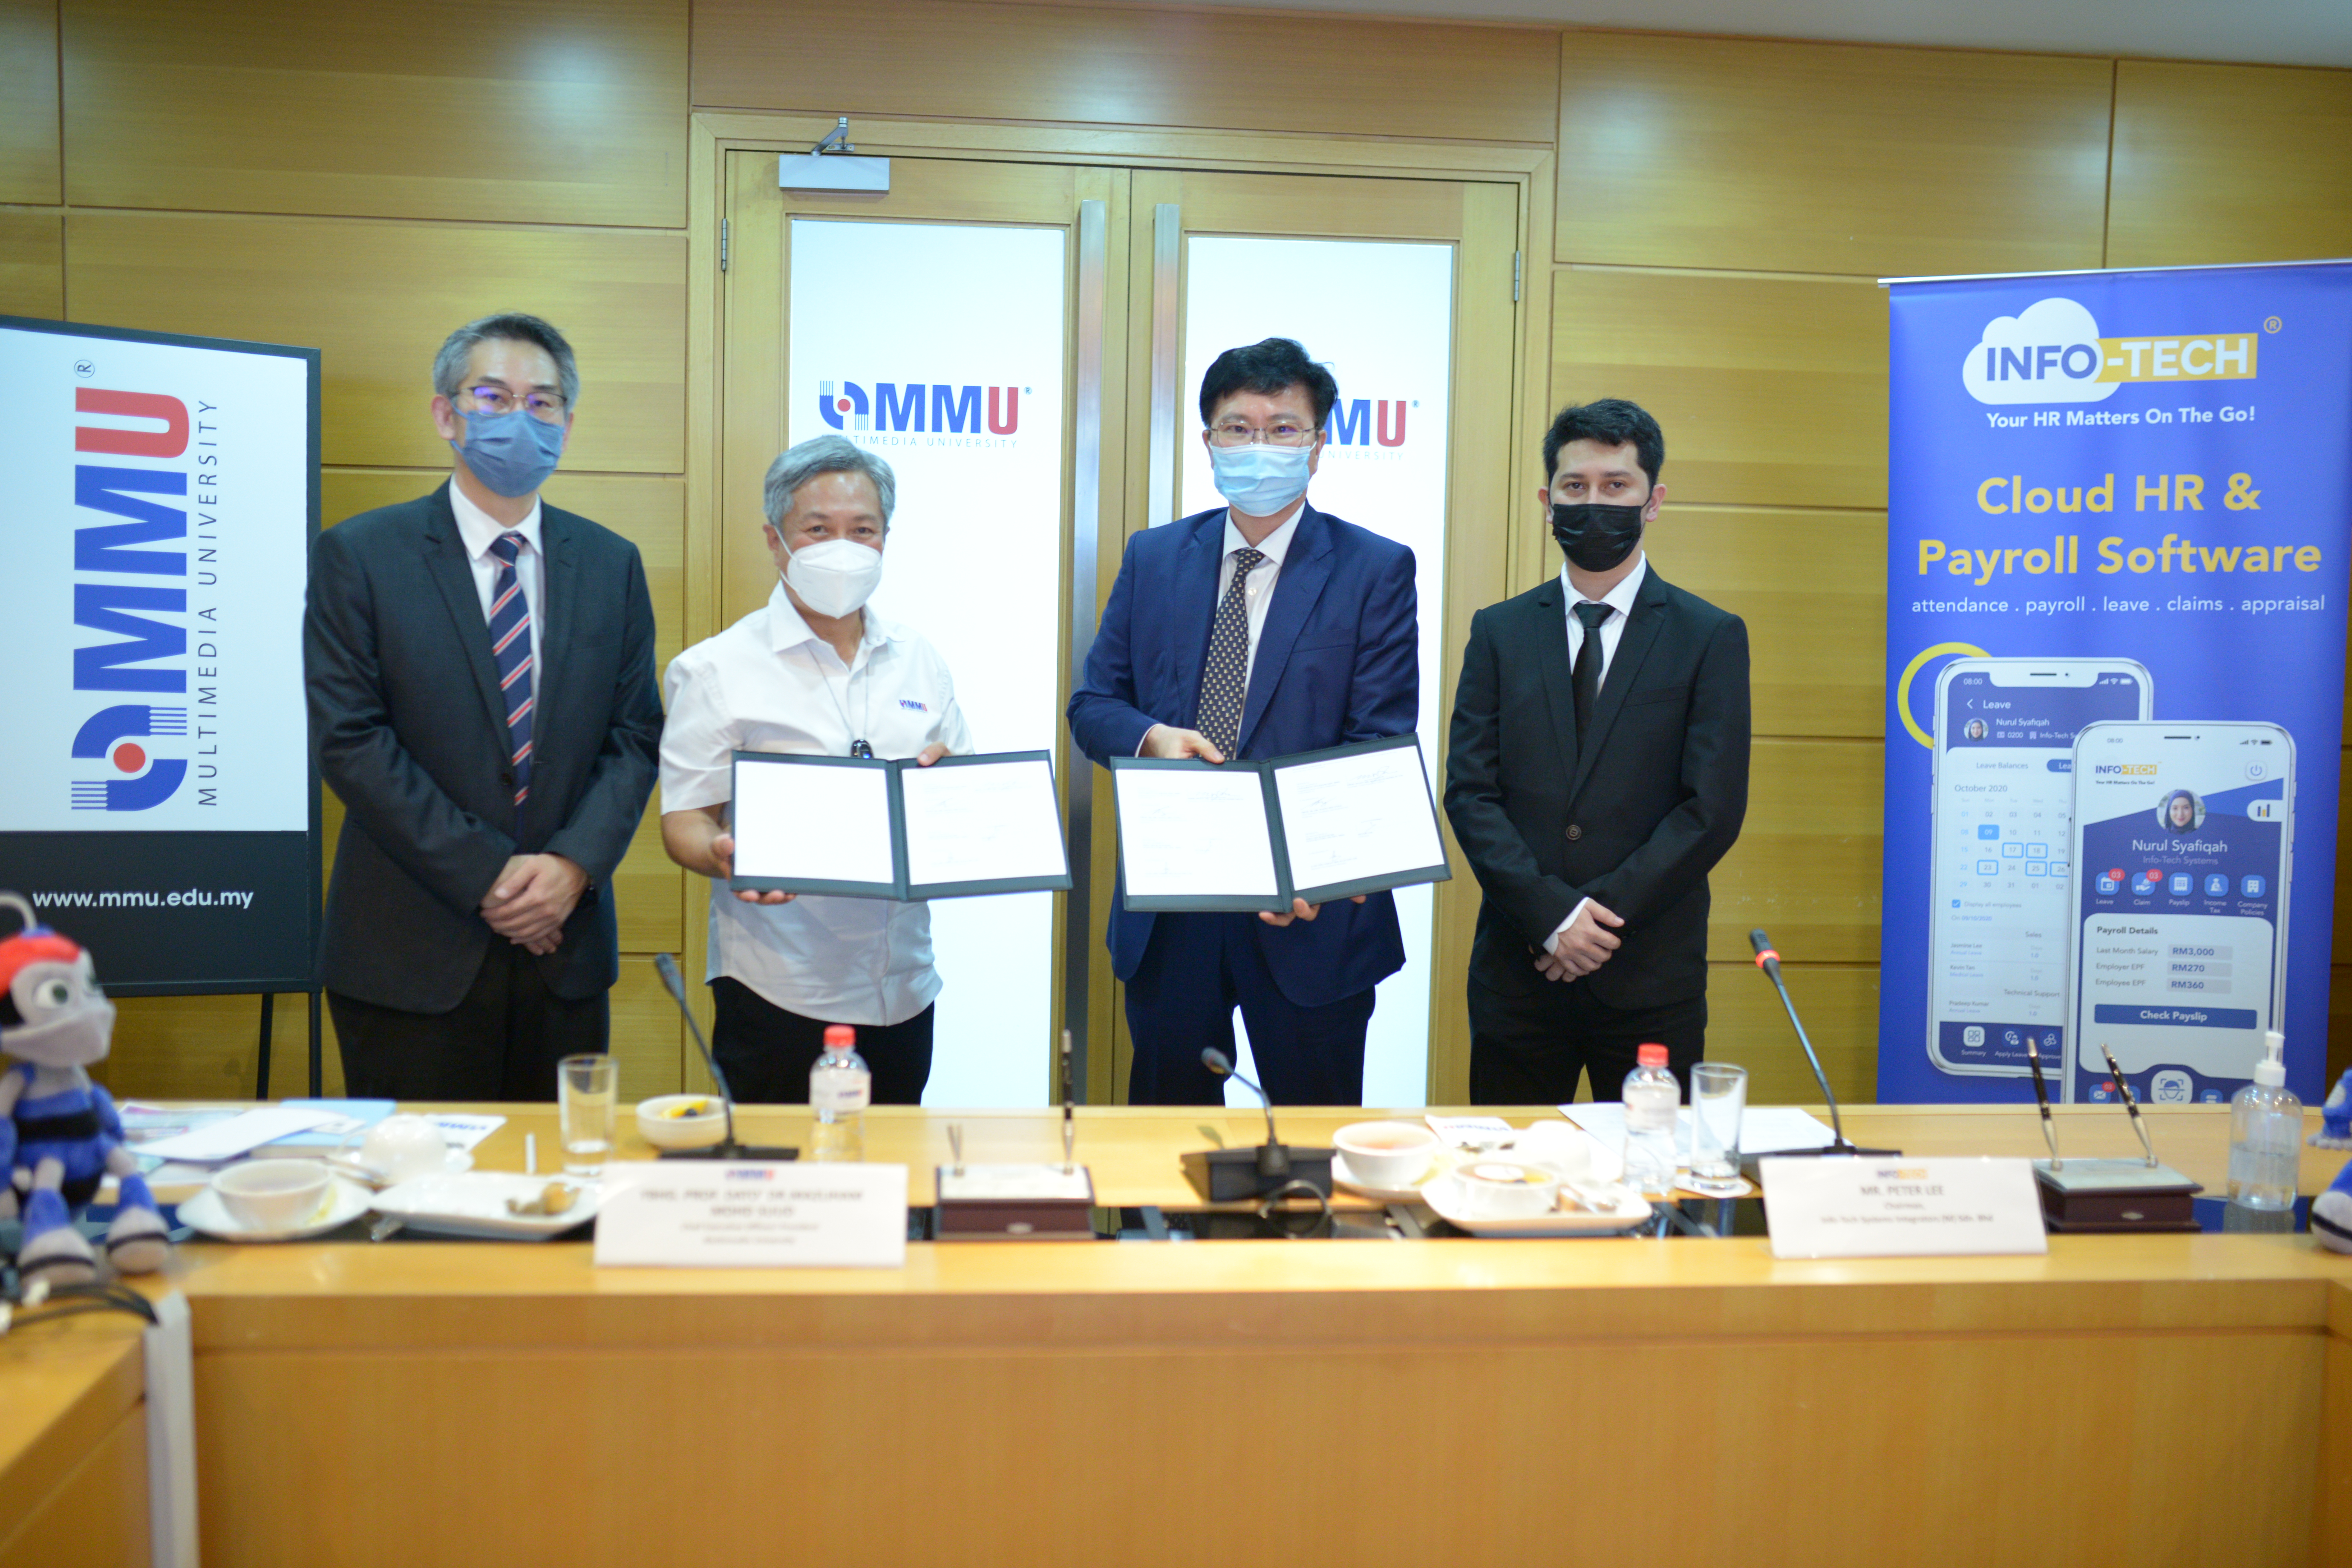  Info Tech - Prof Dato Dr Mazliham Mohd Suud (second from left) and Mr Peter Lim (right) exhanging MoU documents at the MoU Signing Ceremony at MMU Cyberjaya